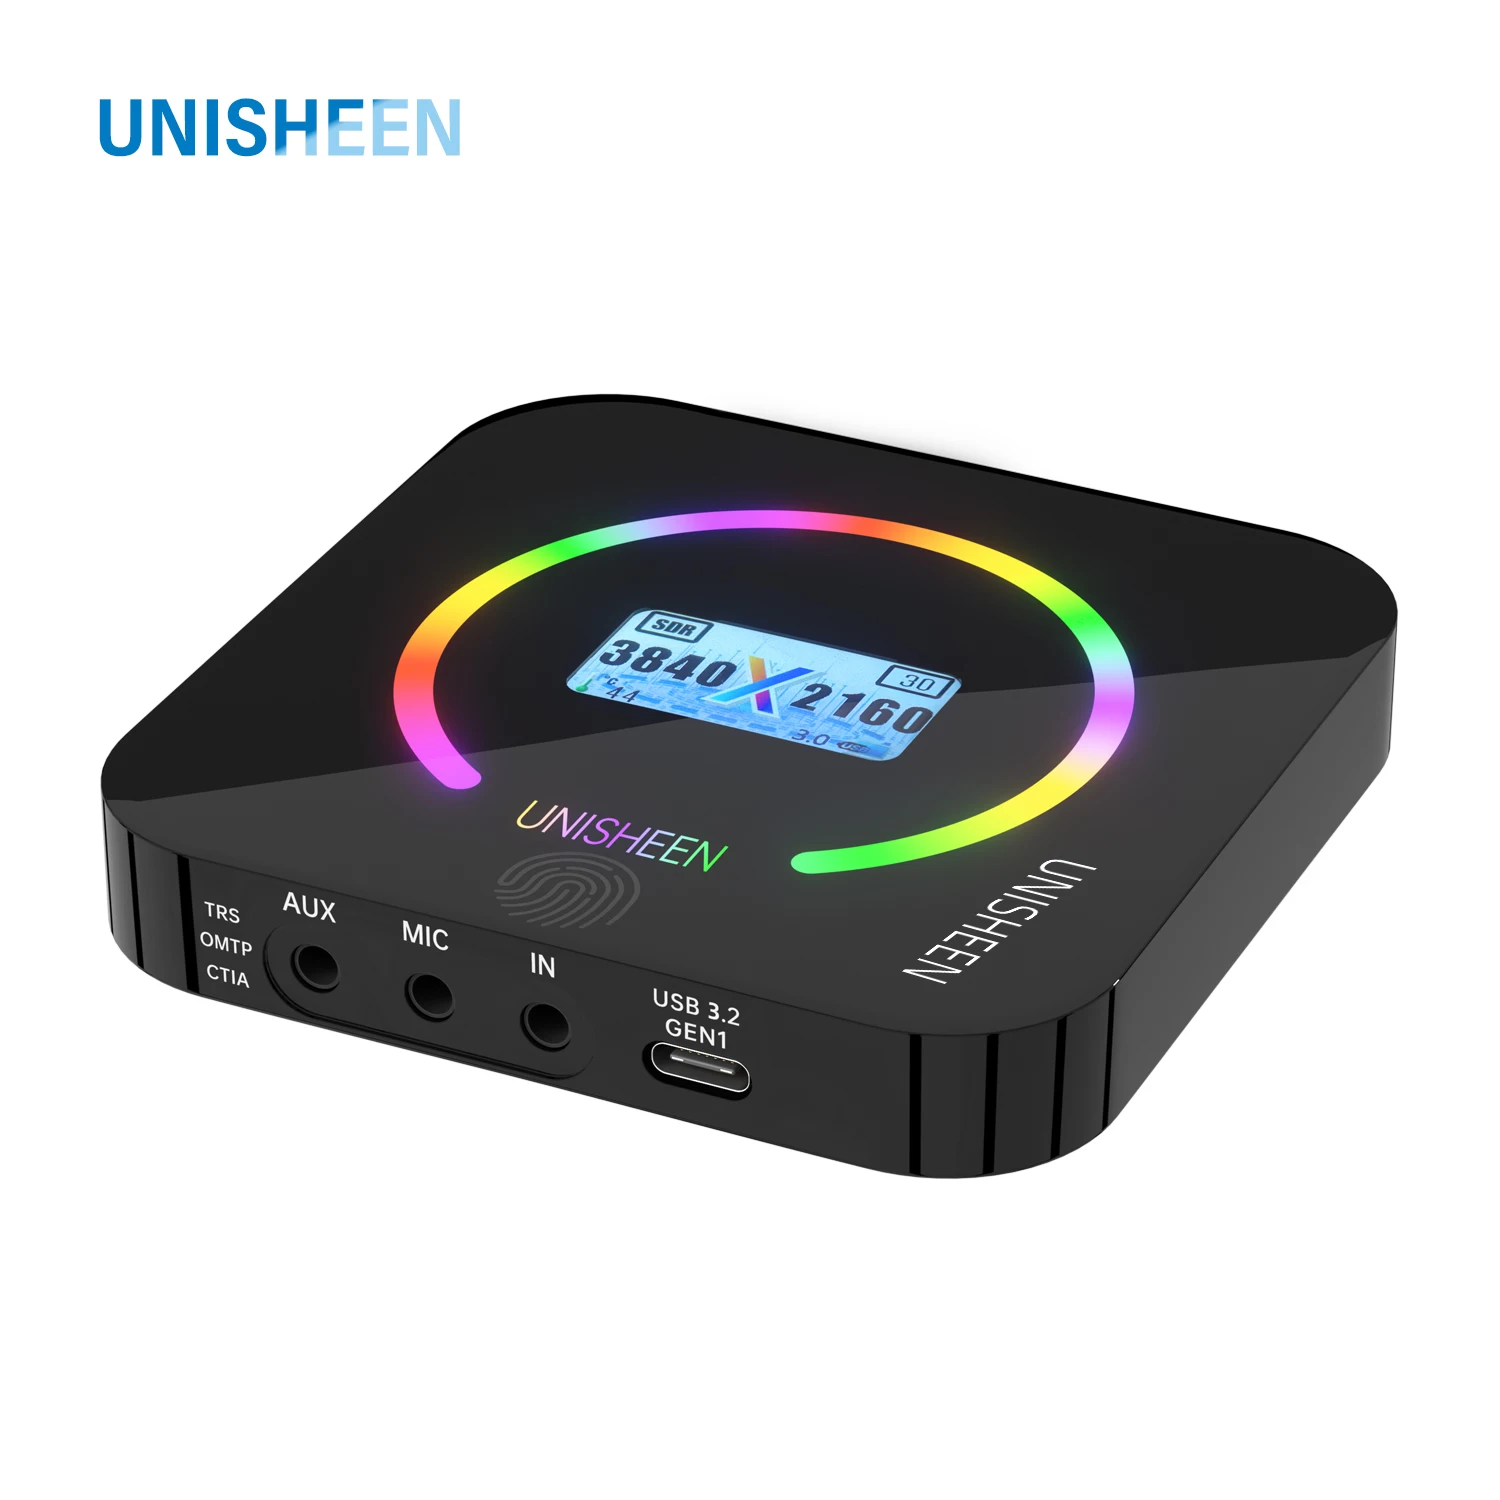 HDR VRR Game Streaming Equipment Live Broadcast 2160p OBS vMix 4K 60fps Loopout HDMI VIDEO CAPTURE Card Box PS5 Grabber Dongle portable usb 60fps sdi hdmi video capture card box grabber dongle adapter type c